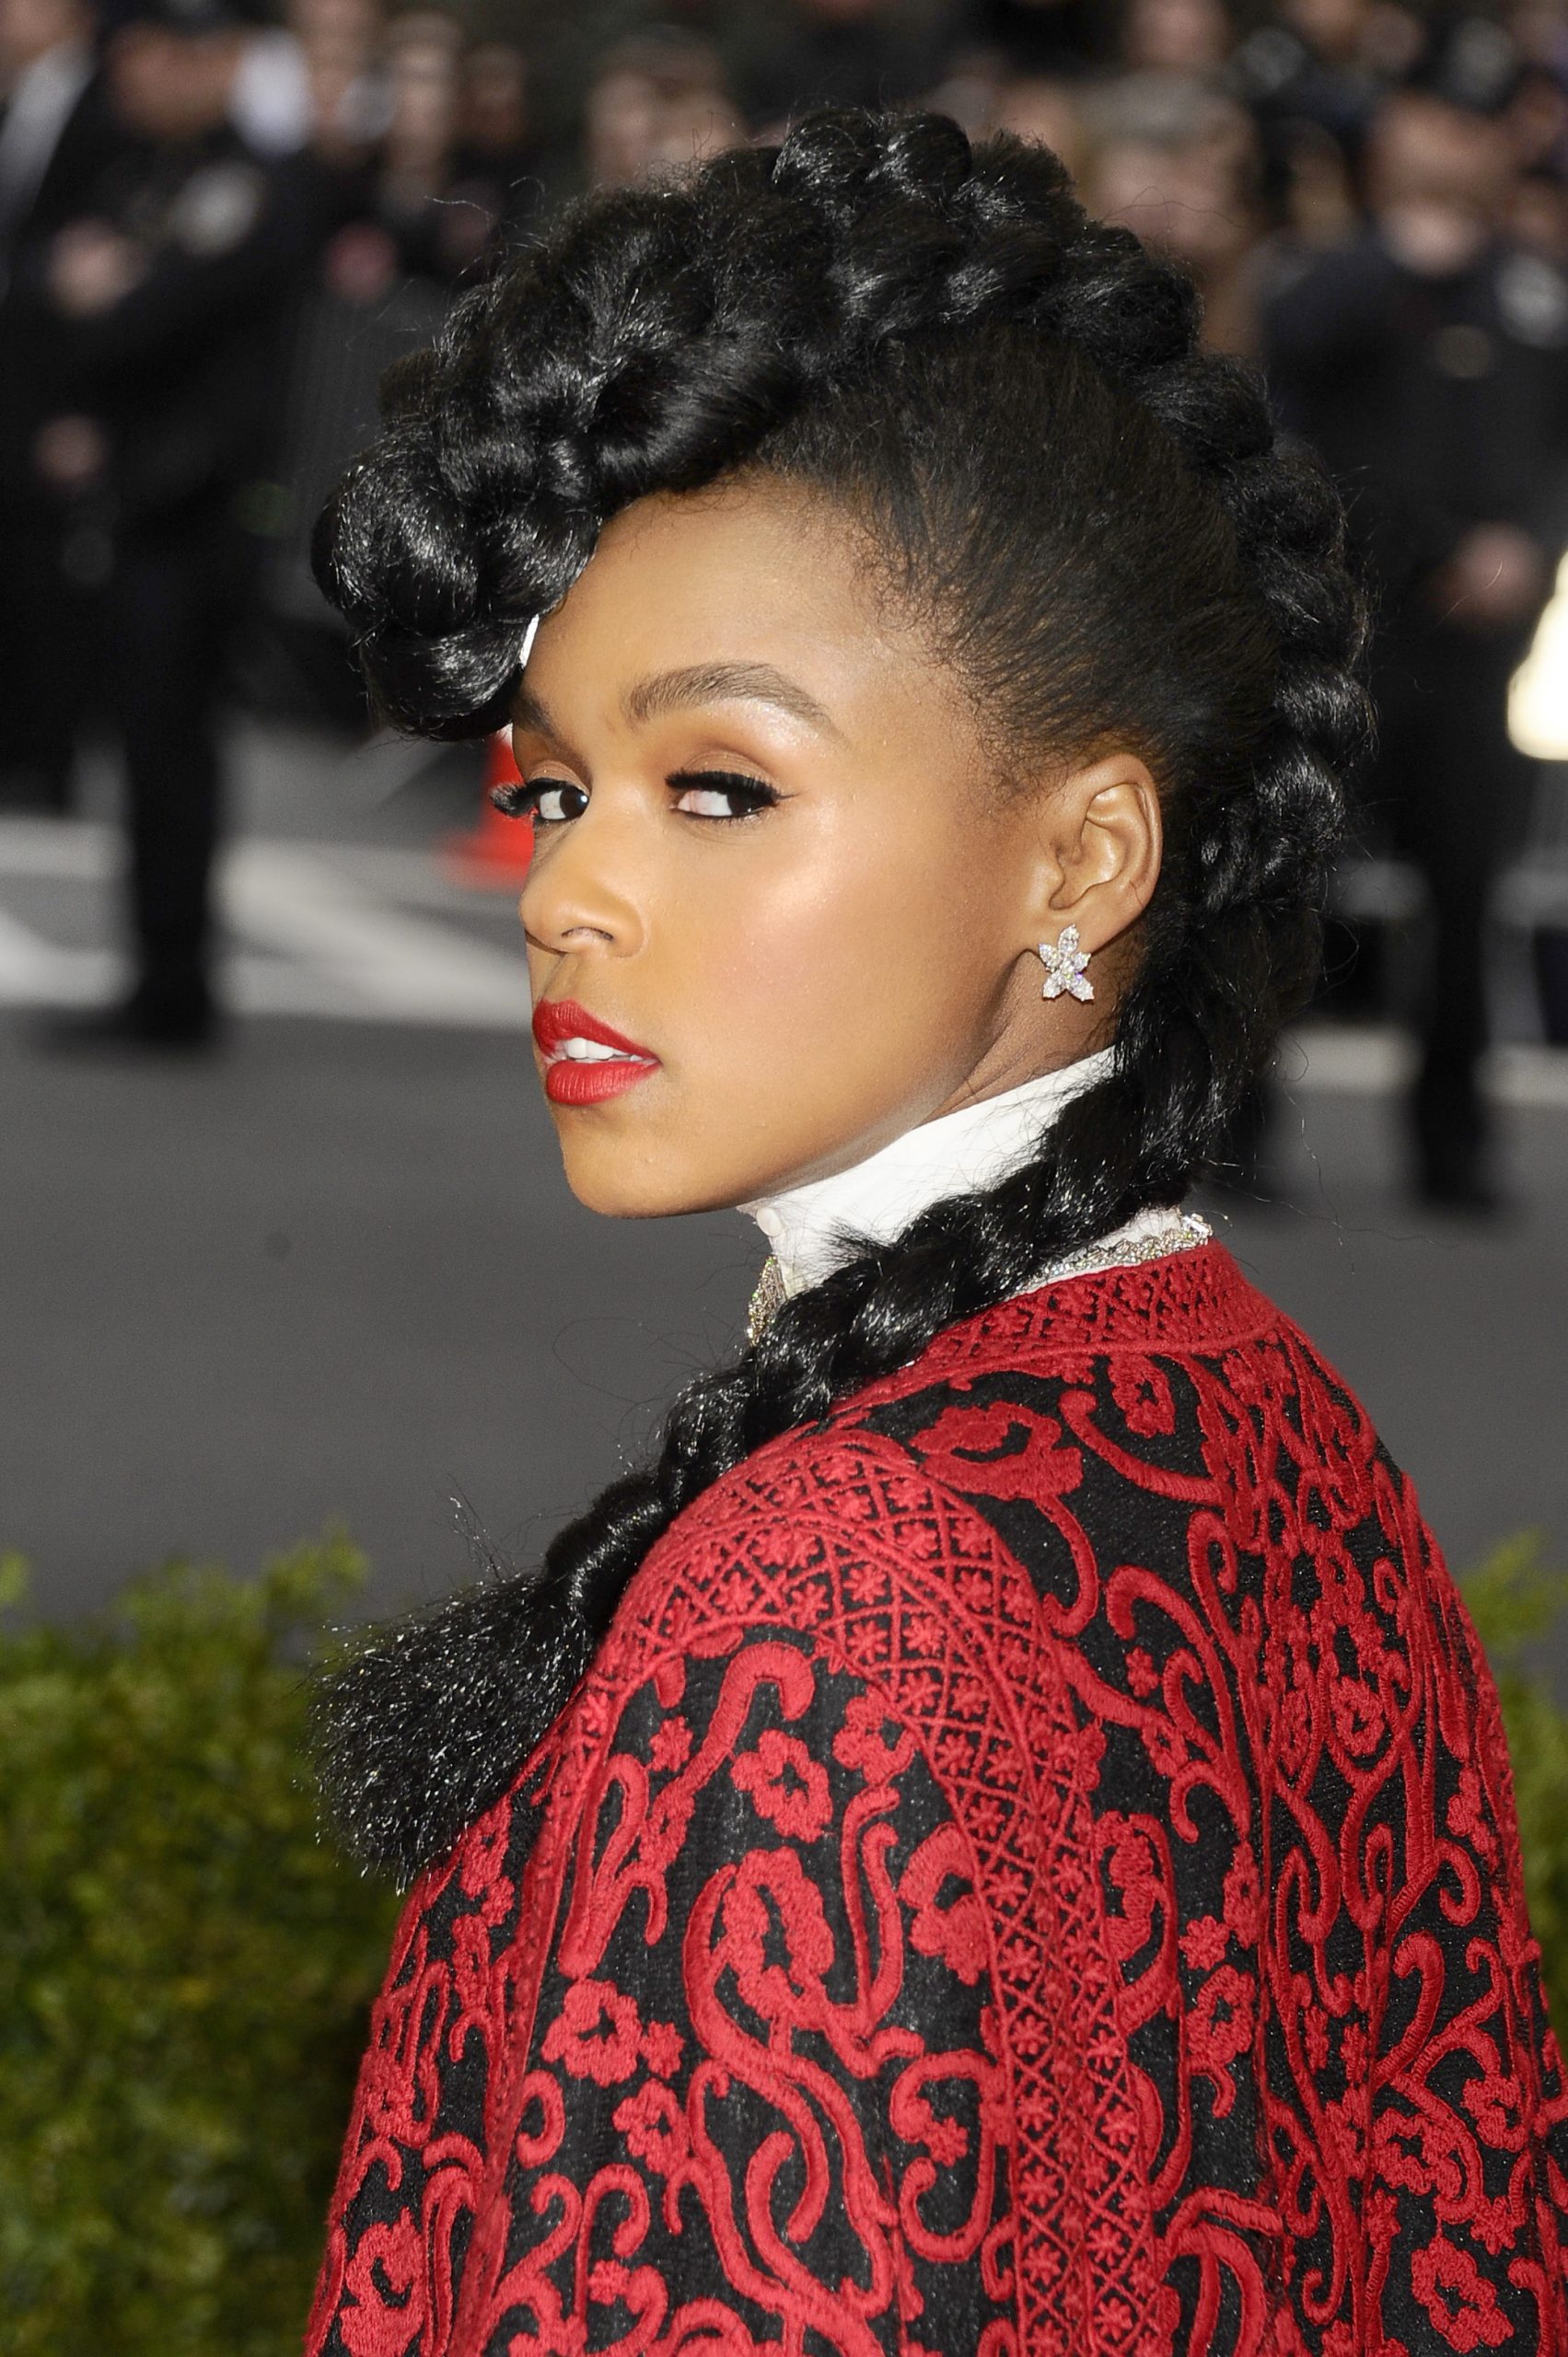 How to book Janelle Monae? Anthem Talent Agency